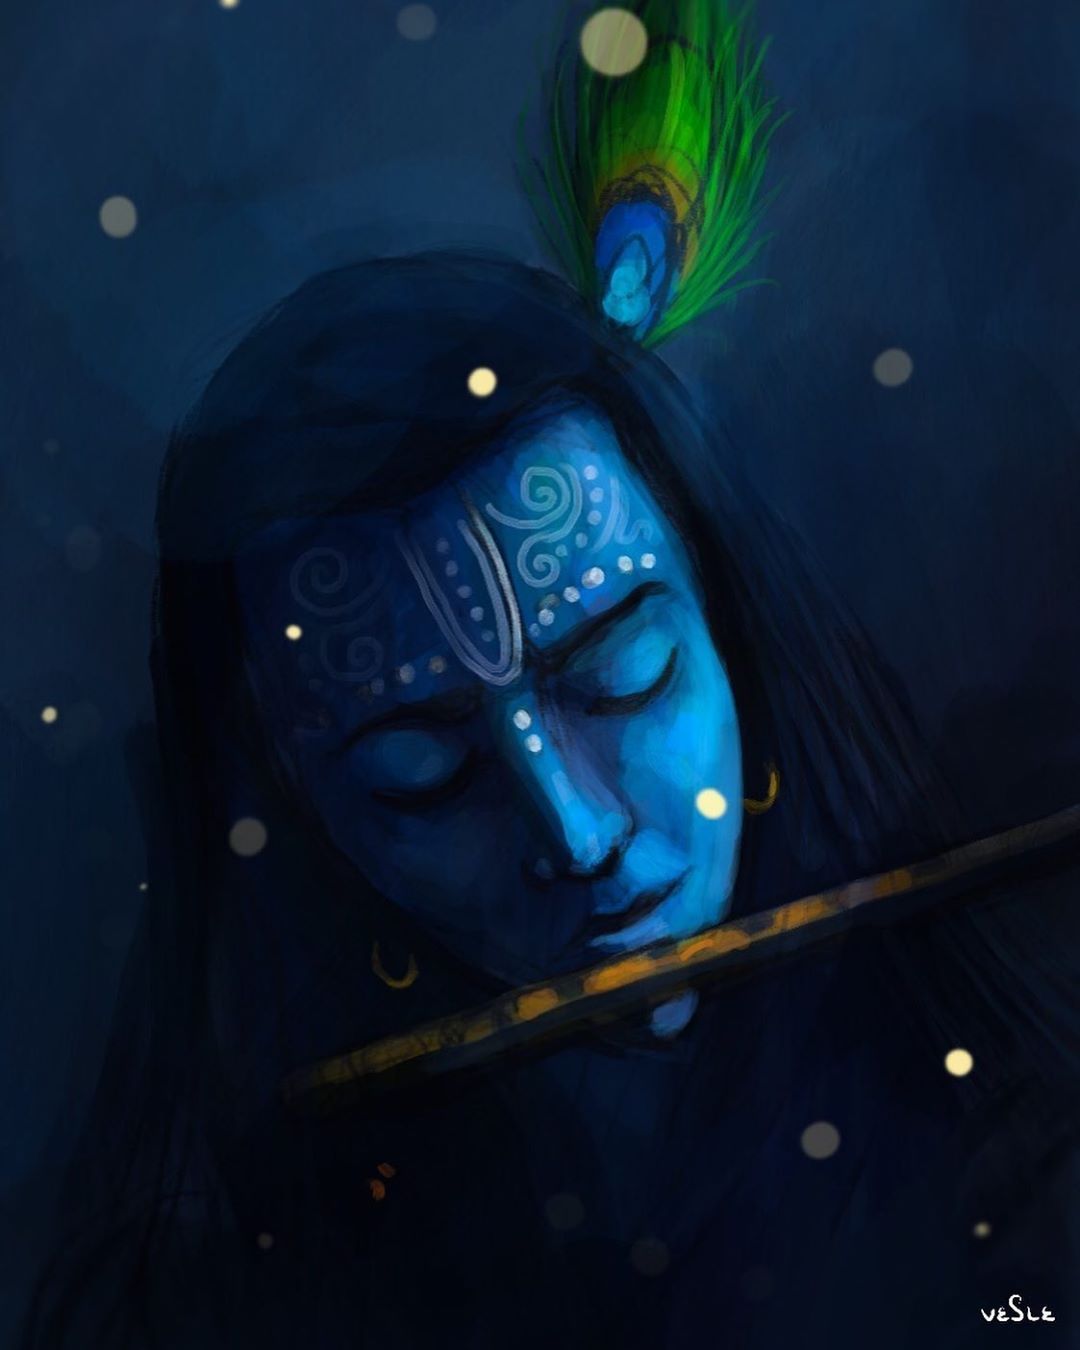 Lord Krishna Painting Wallpapers - Wallpaper Cave